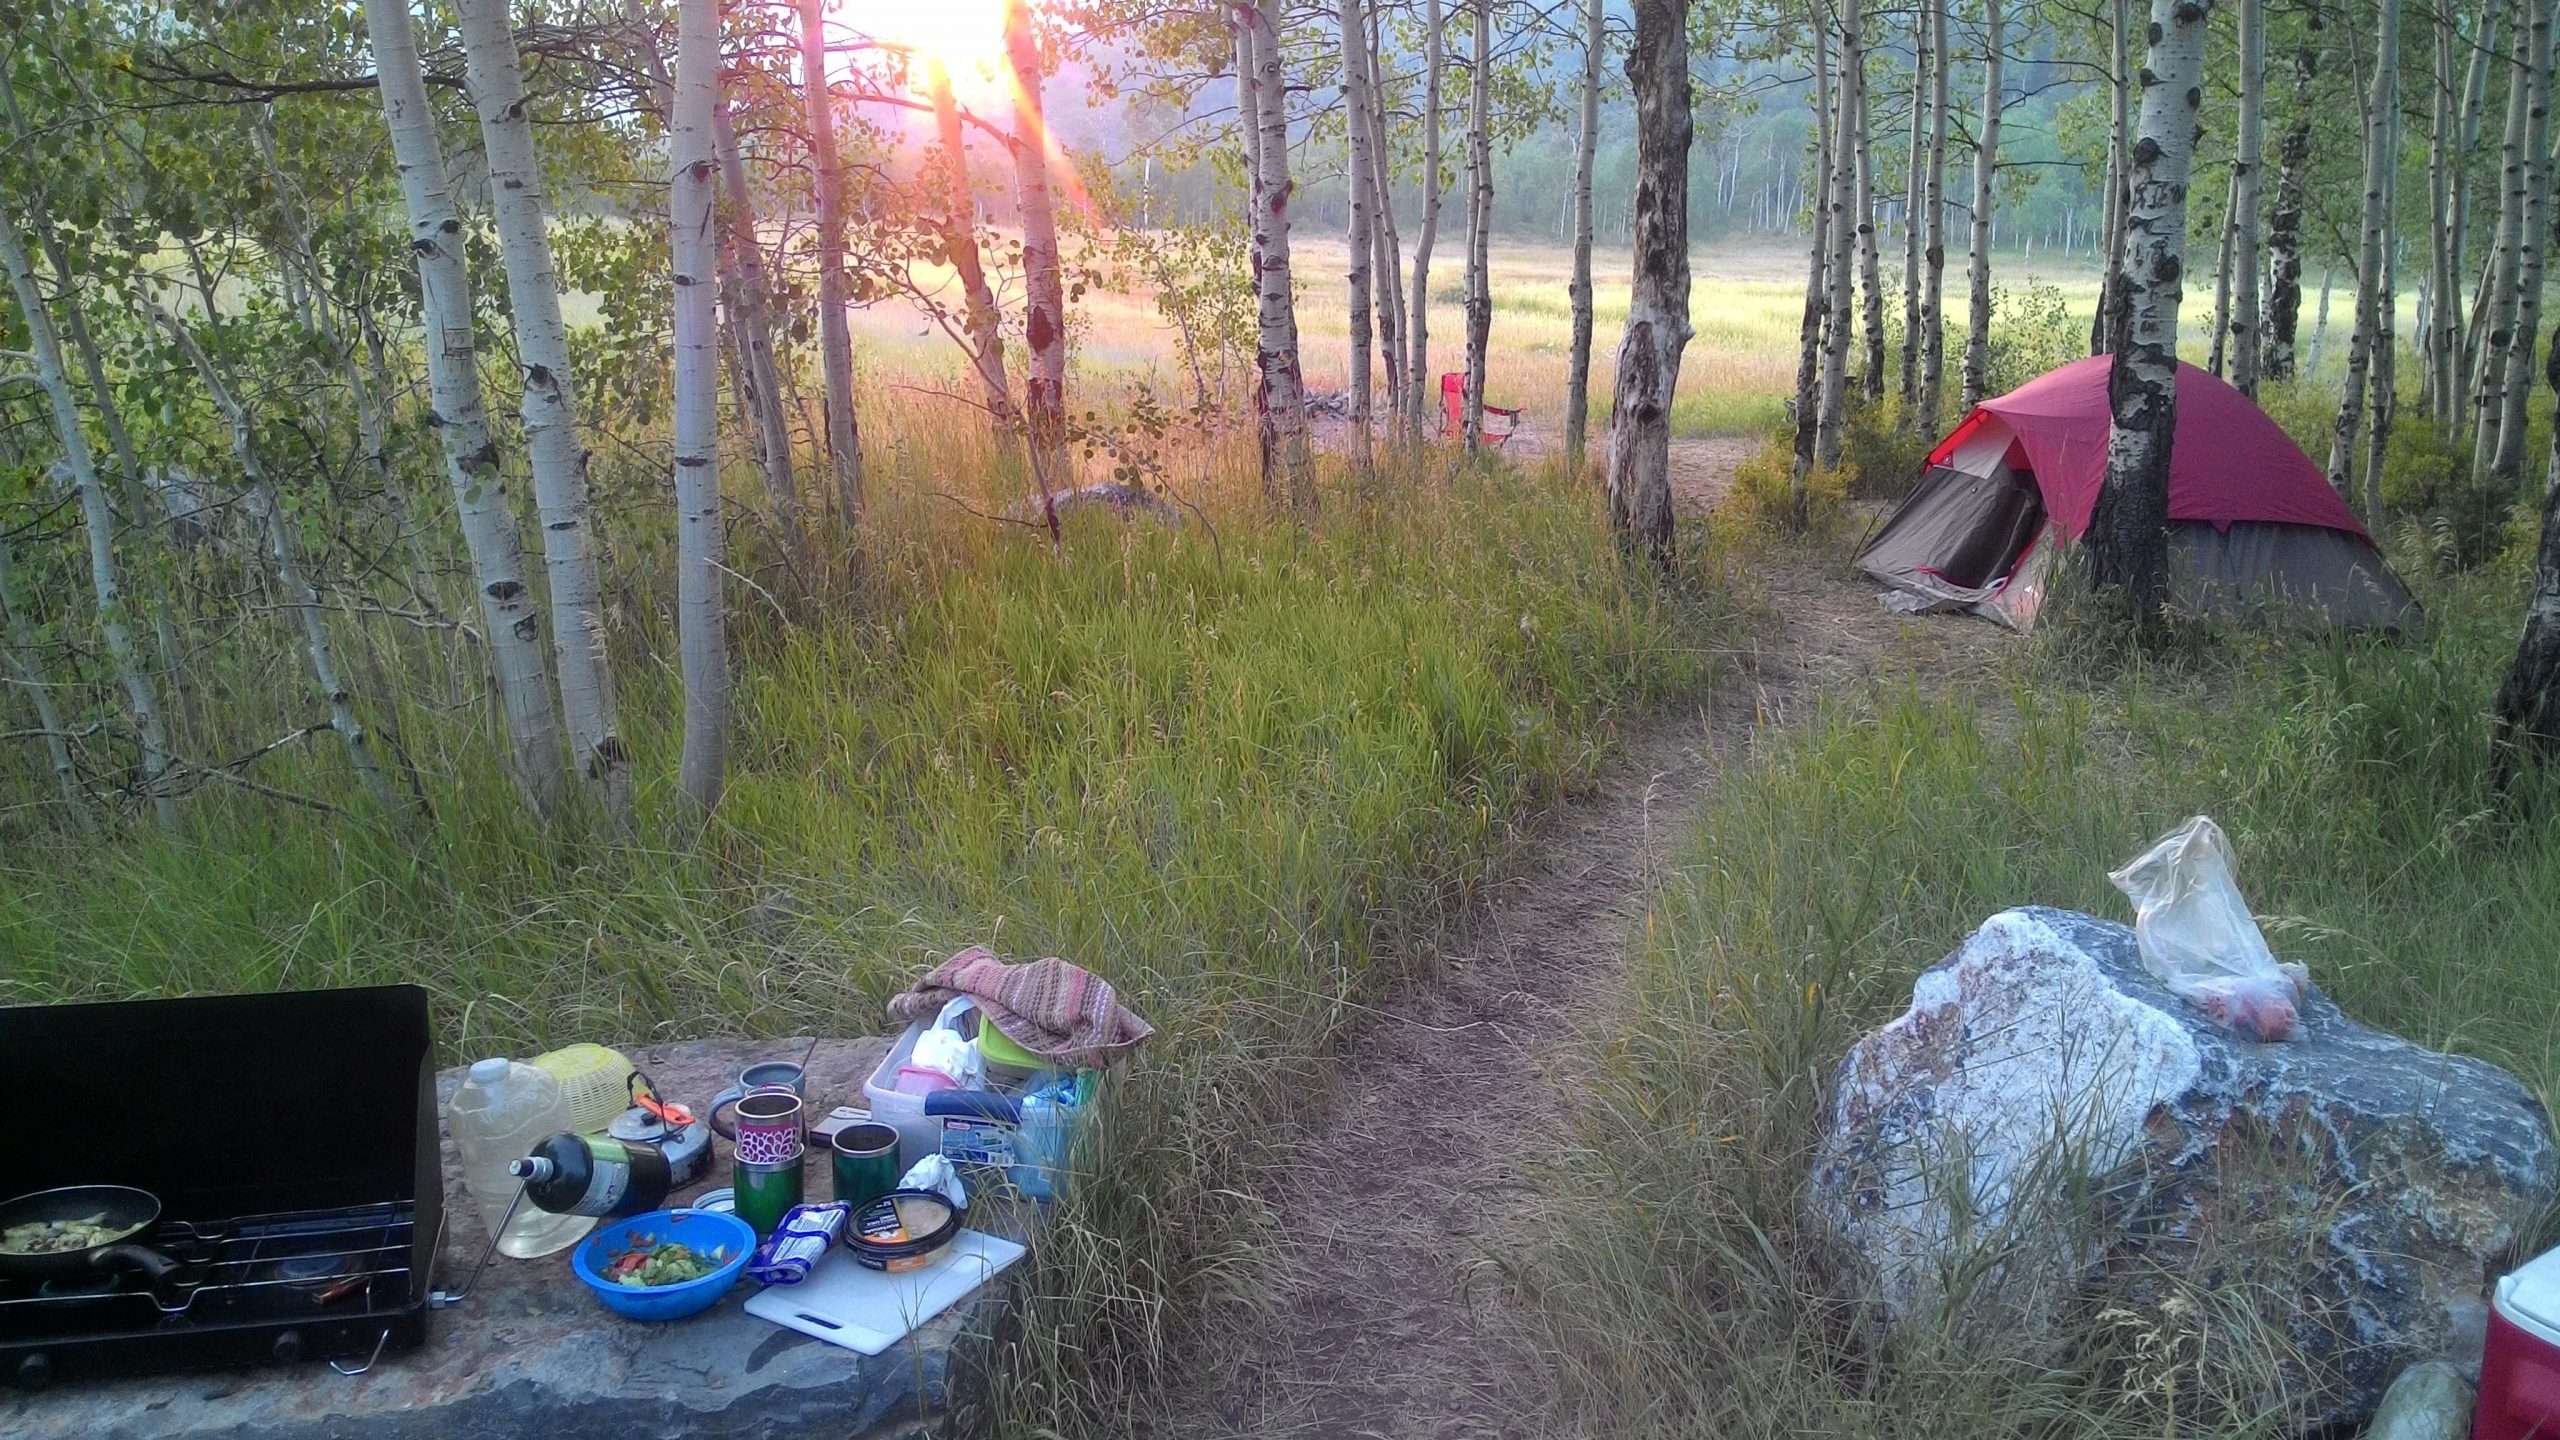 Nearly free camping in the Unita Mountains east of Salt Lake City ...